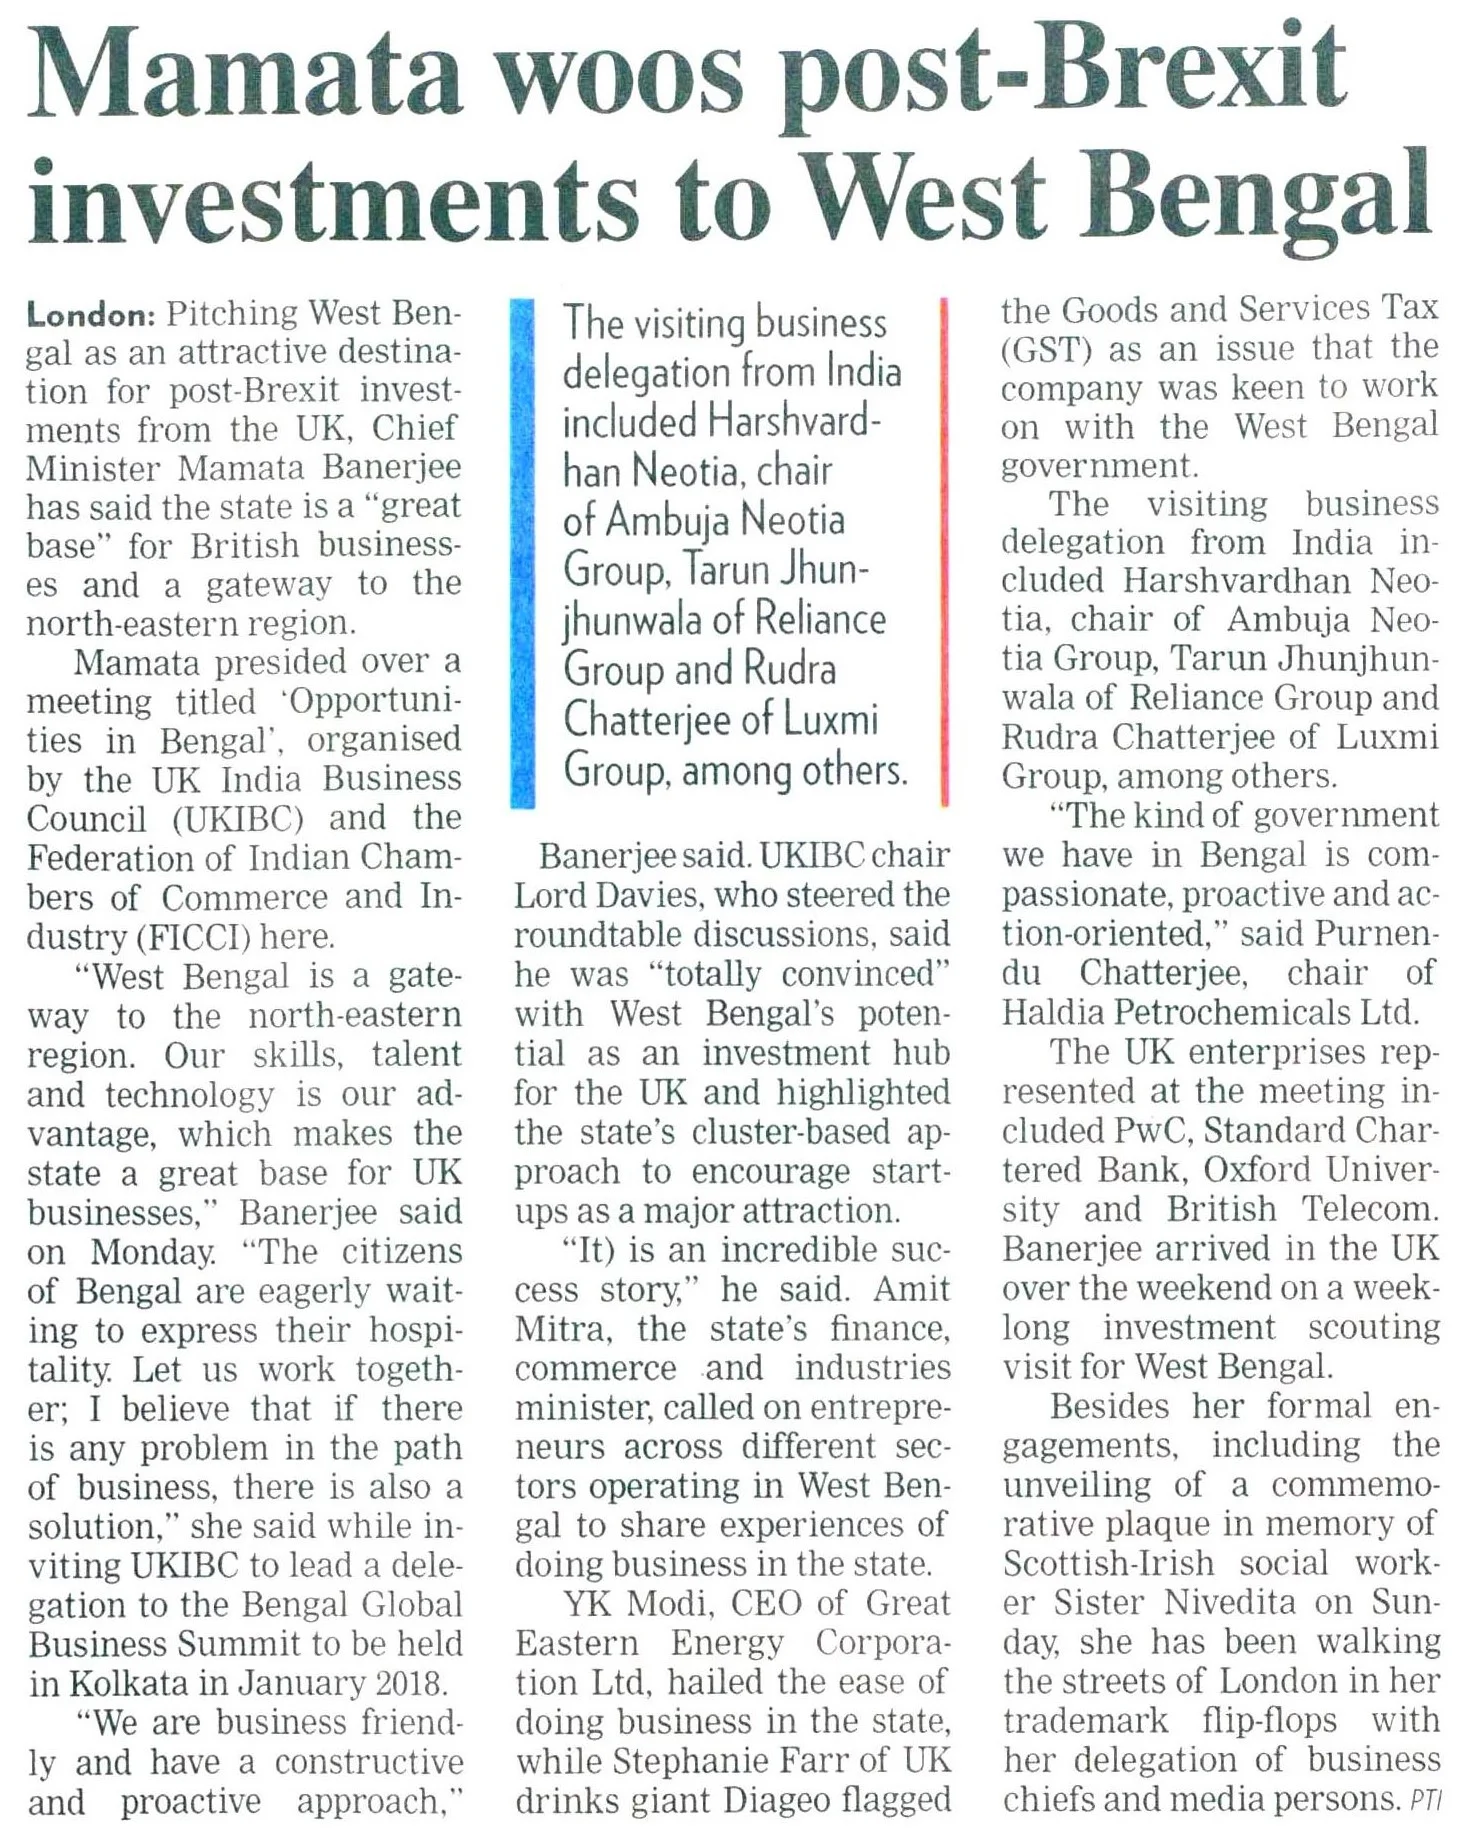 Mamata woos post- Brexit investments to West Bengal